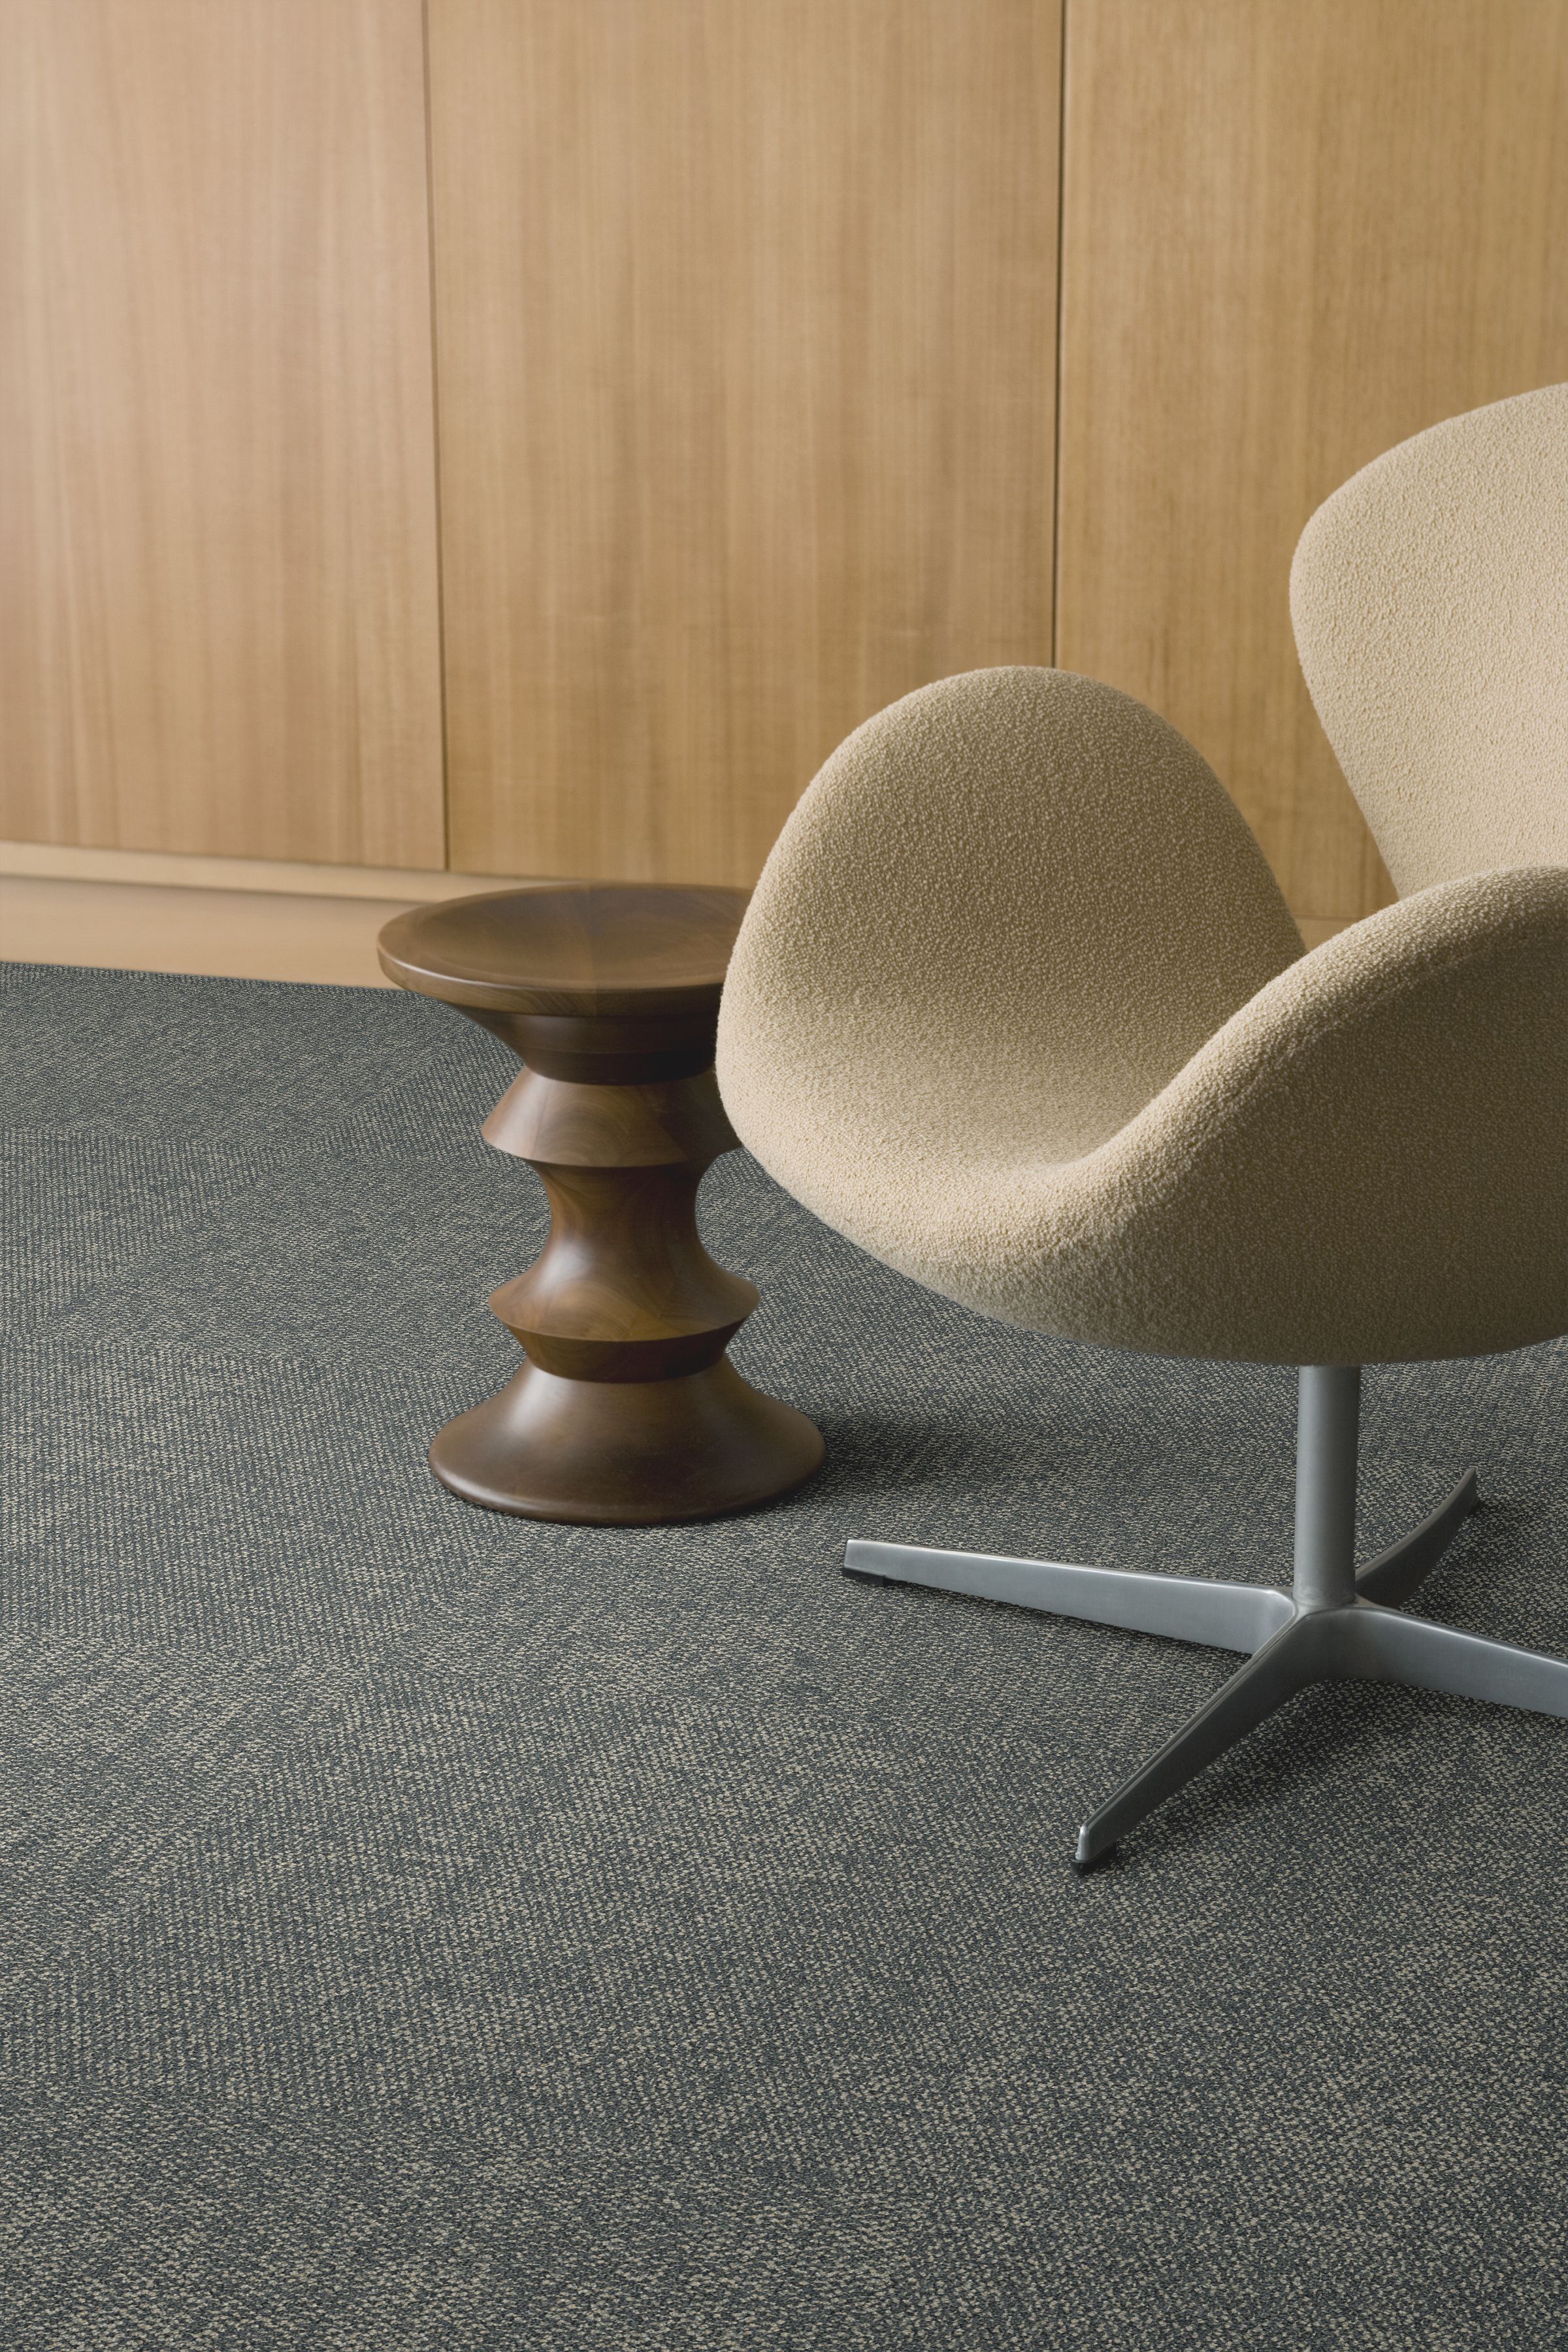 Detail of Interface Lighthearted carpet tile with chair and Eames stool numéro d’image 2